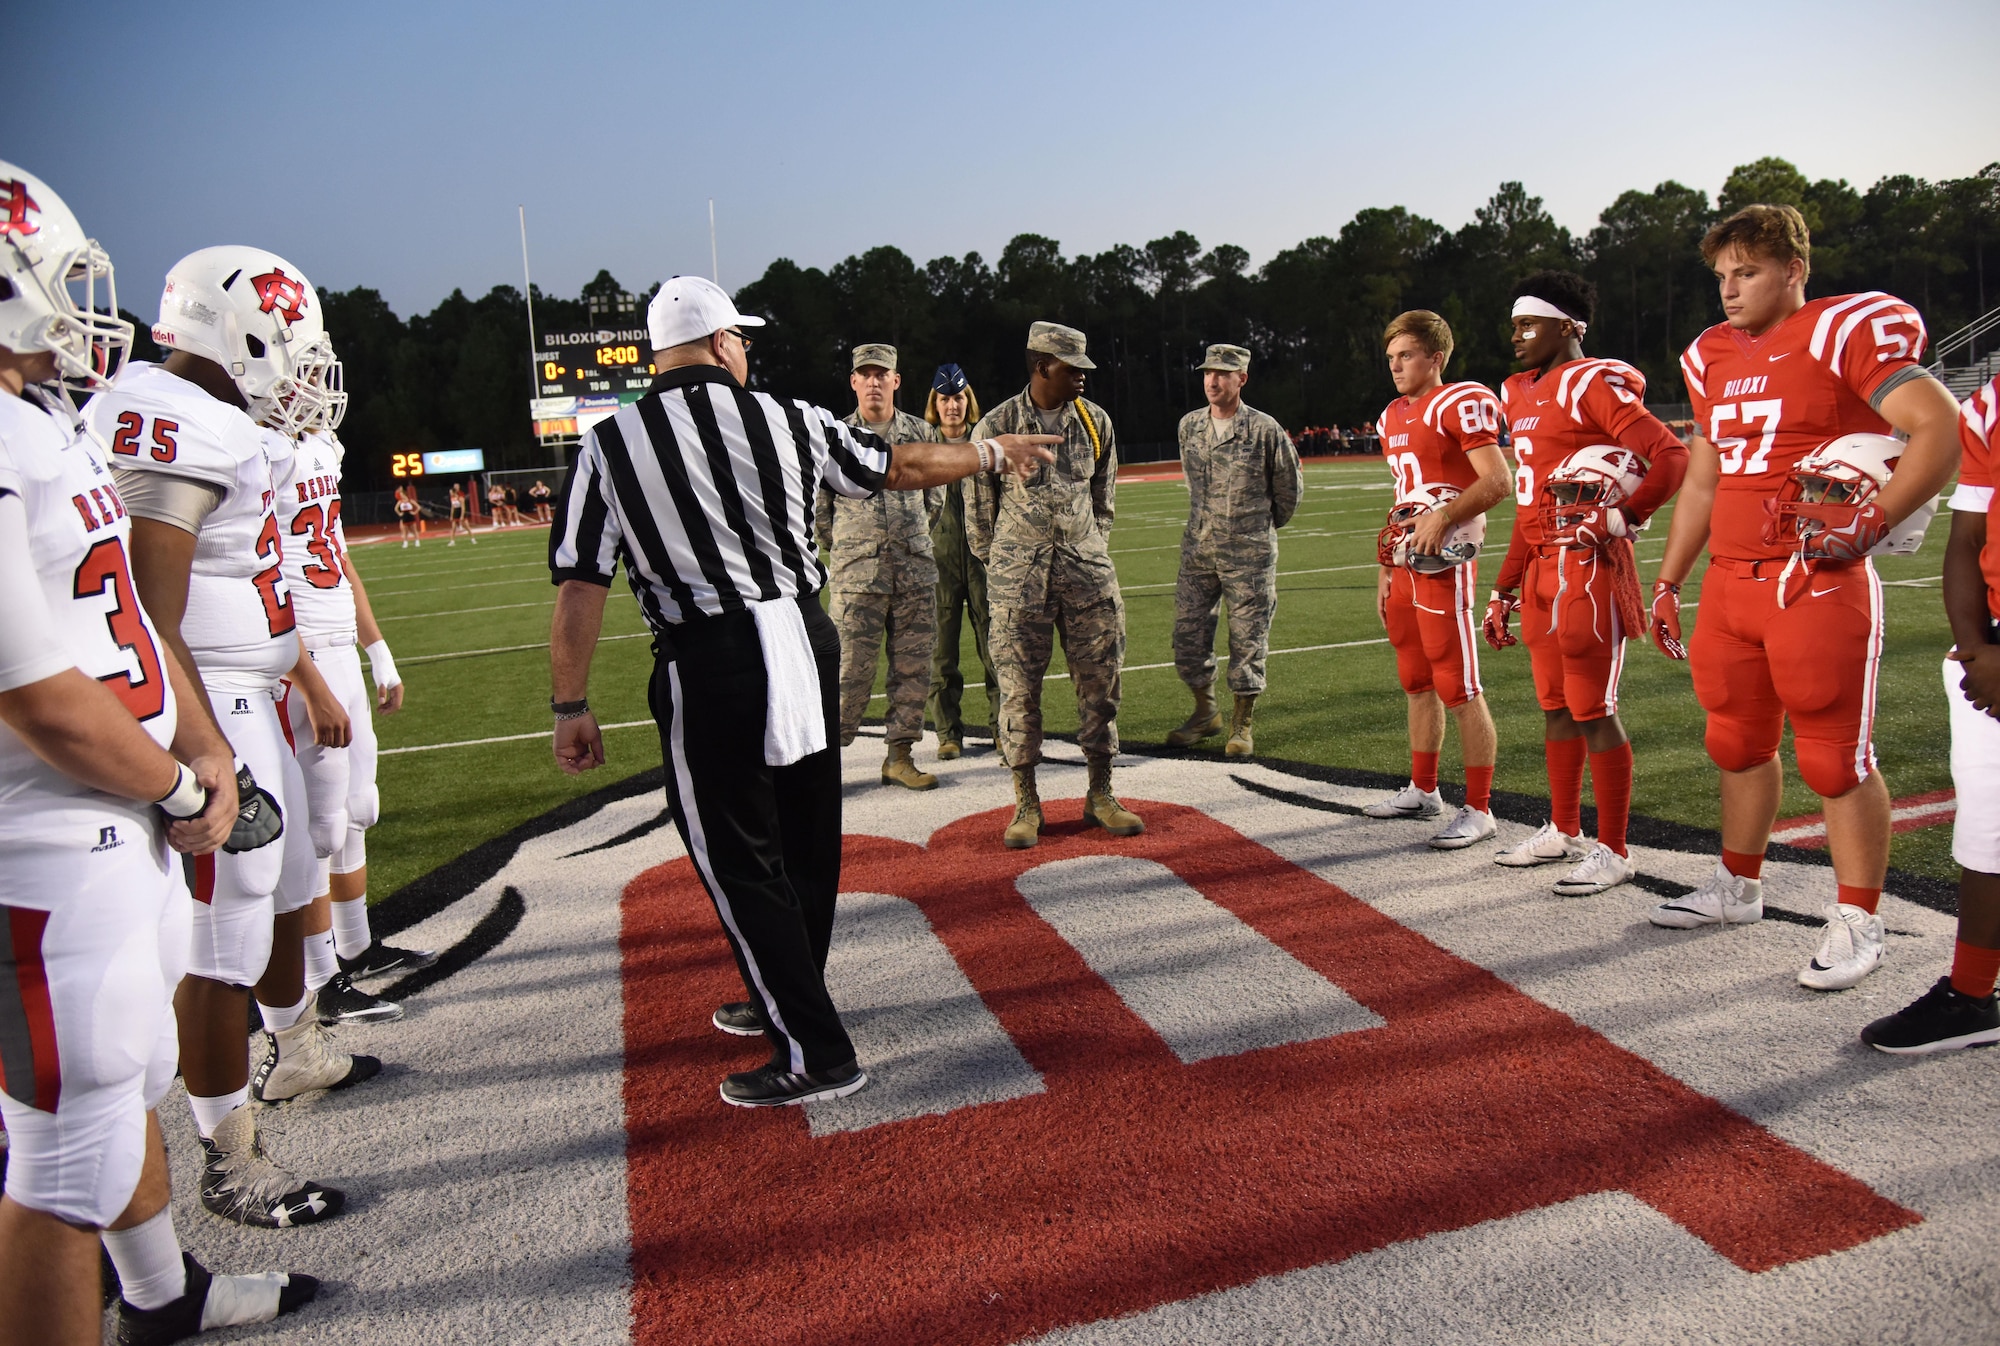 Keesler leadership and personnel participate in a coin toss ceremony during the Biloxi High School military appreciation night football game Sept. 29, 2017, Biloxi, Mississippi. Keesler leadership participated in the coin toss to determine which team would receive the ball first. (U.S. Air Force photo by Kemberly Groue)